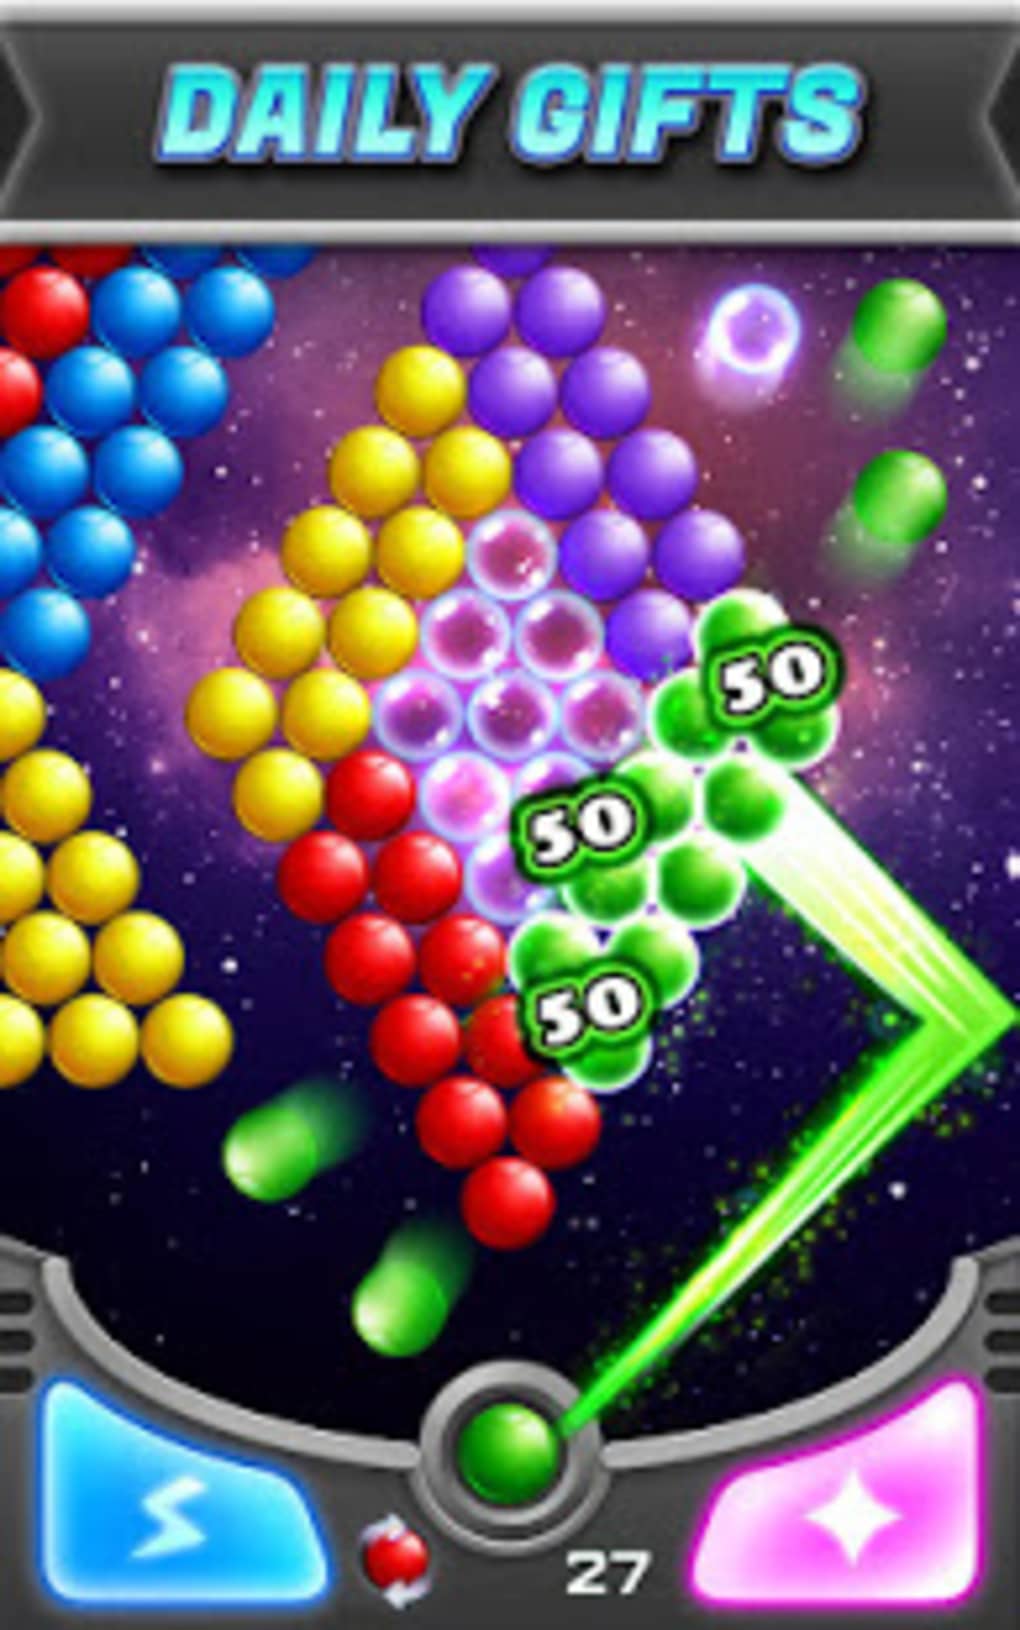 free games online bubble shooter extreme